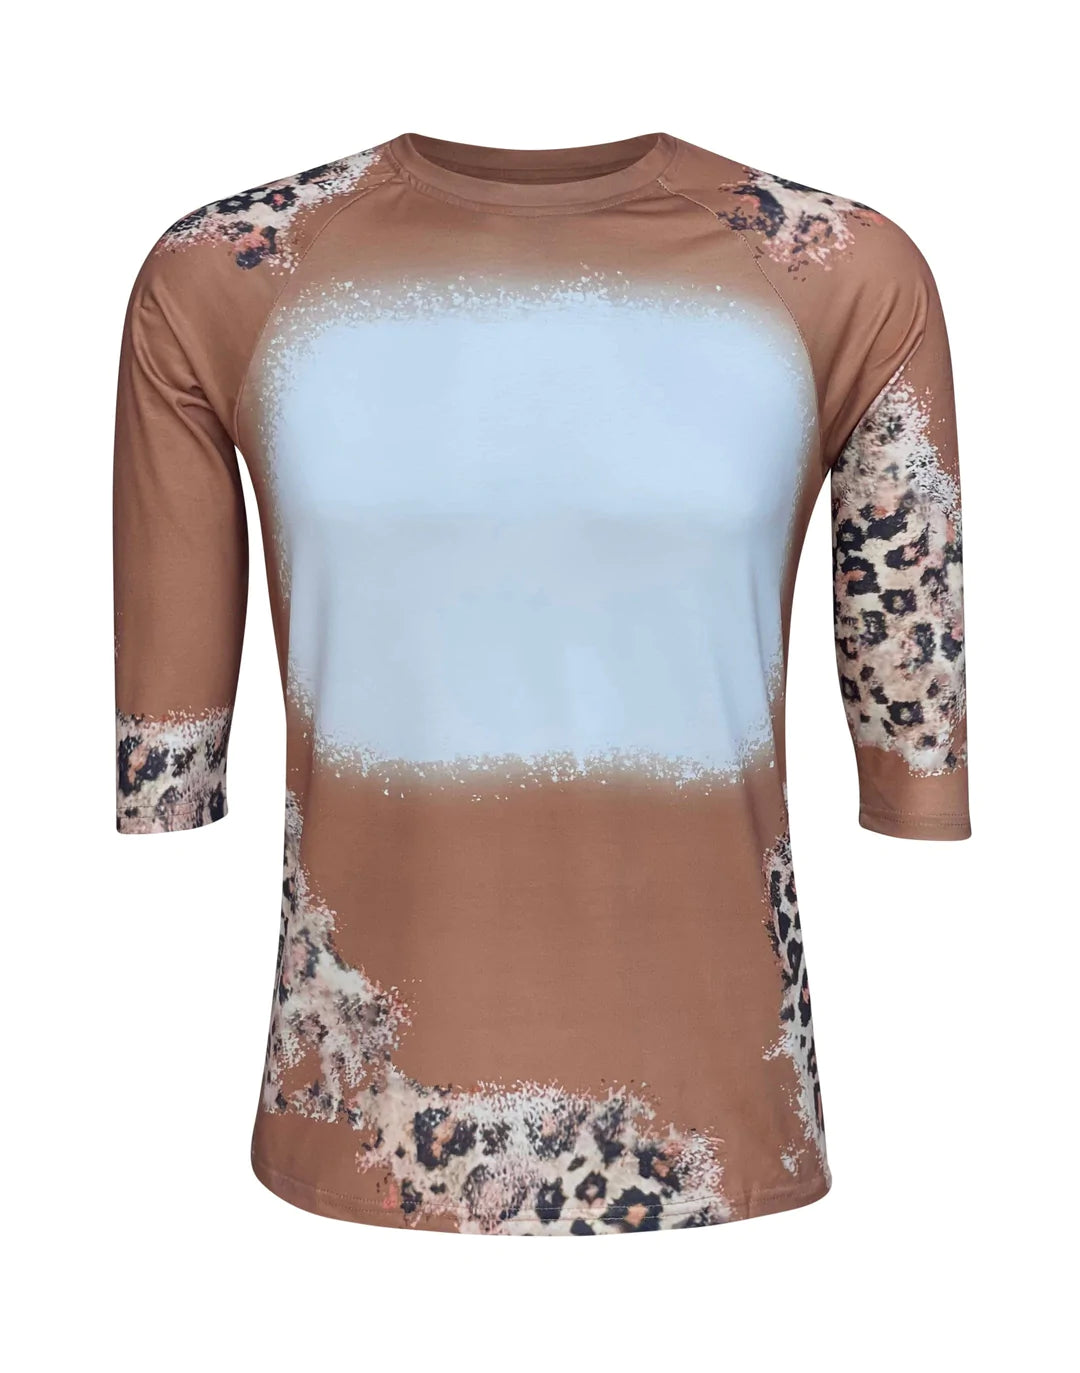 Brown Cheetah RAGLAN Adult Faux Bleached Shirts, ready for Sublimation